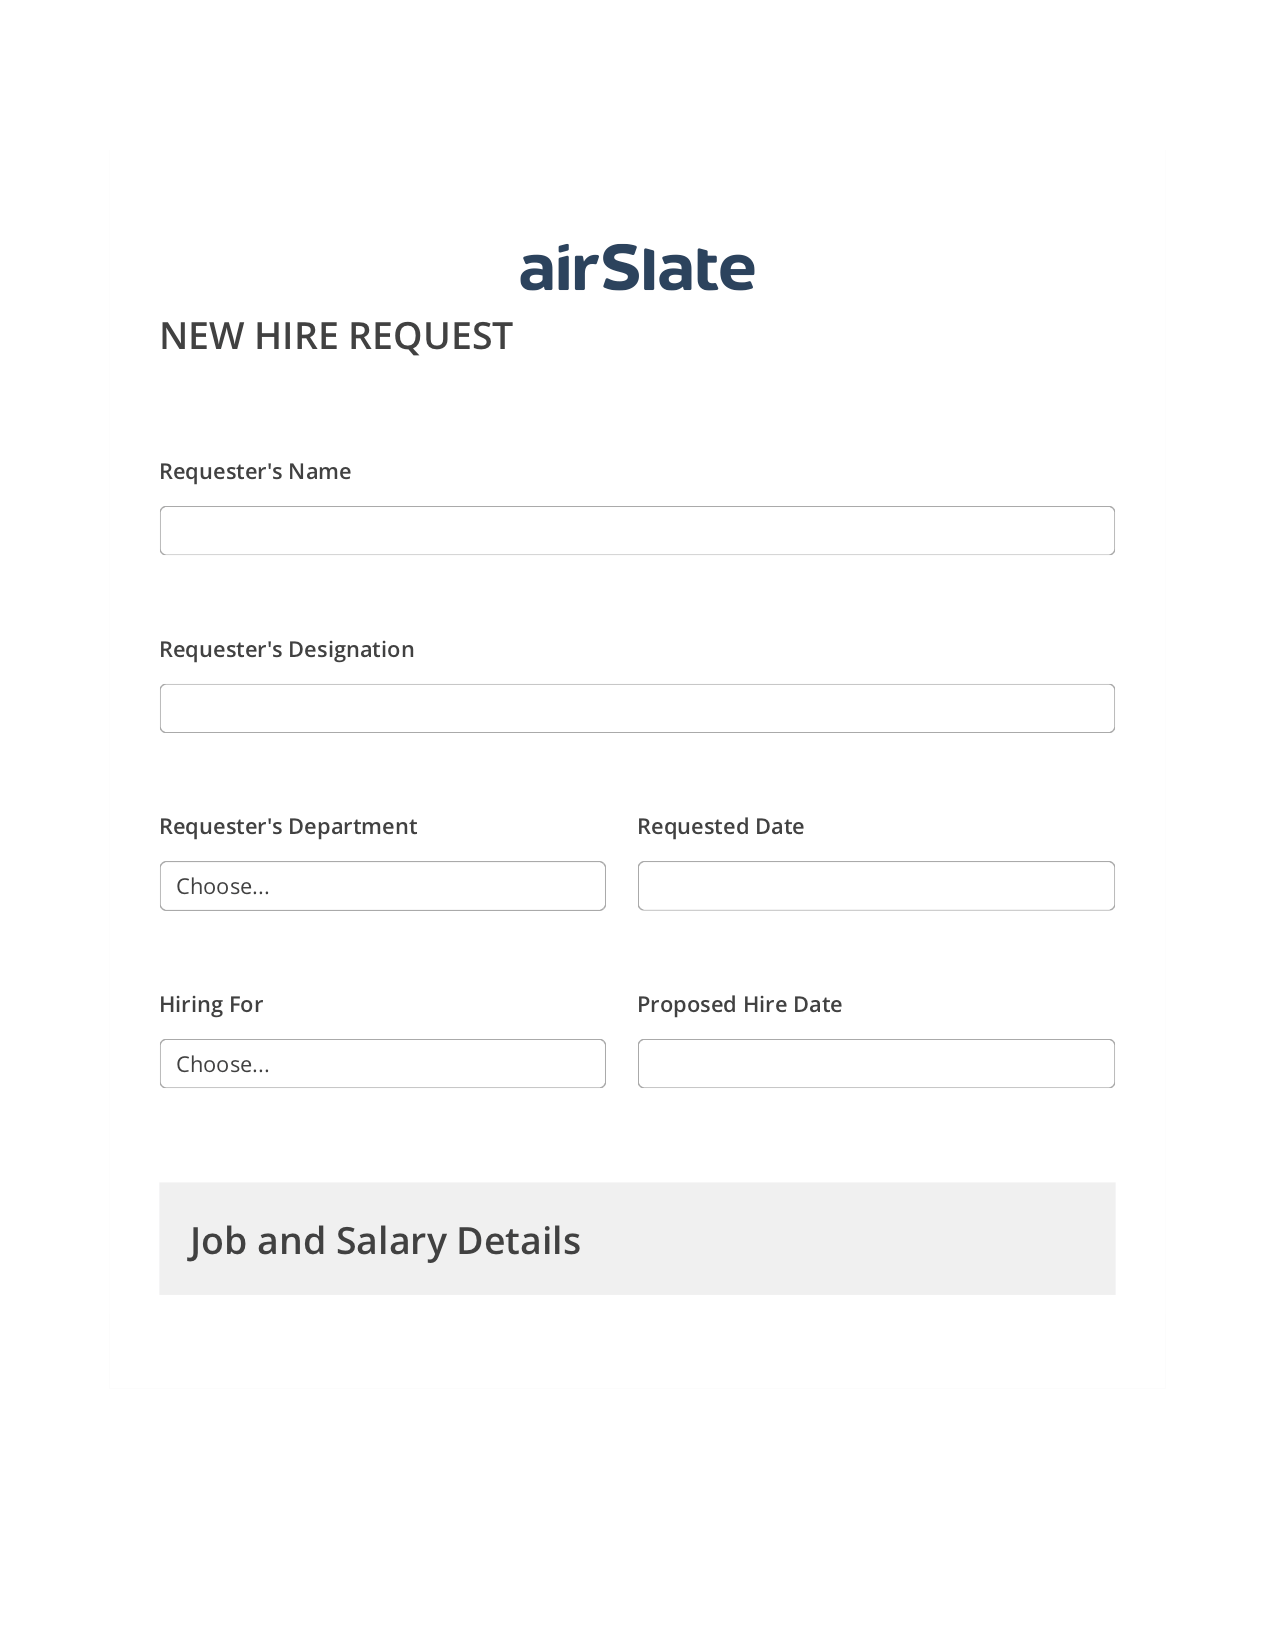 Hiring Request Workflow Pre-fill from Google Sheets Bot, Jira Bot, Export to Excel 365 Bot